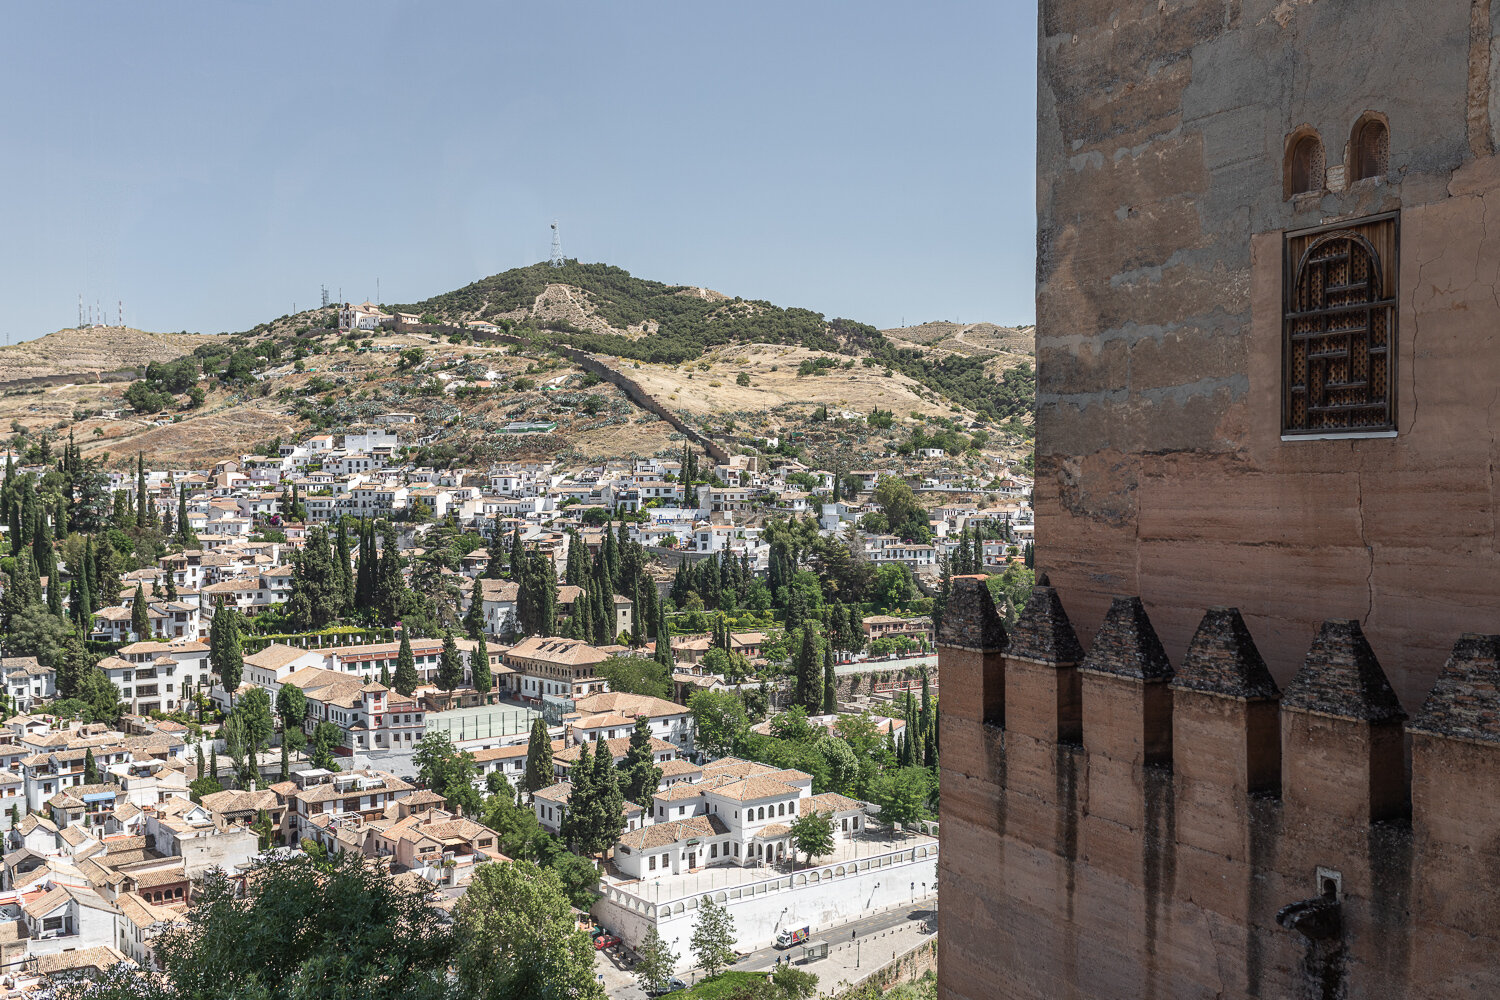 Granada as viewed from Alhambra